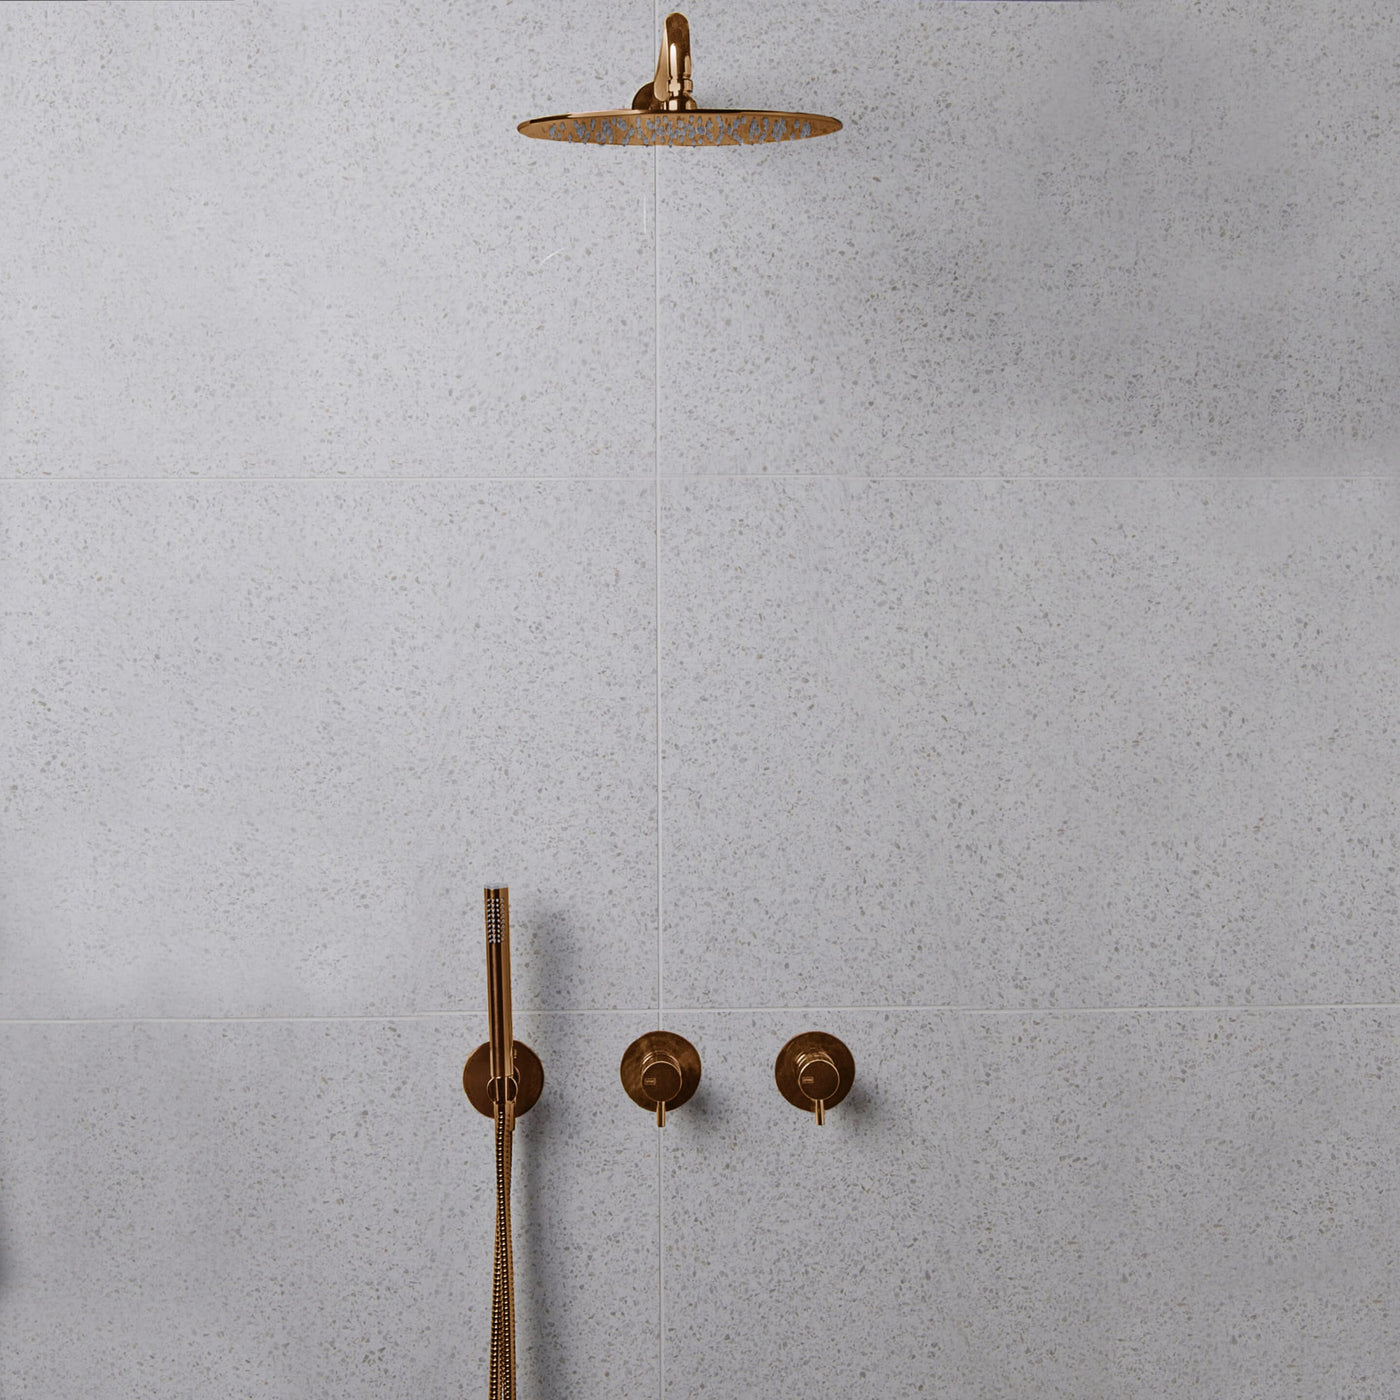 QTOO Two-Way Thermostat Shower in Polished Copper